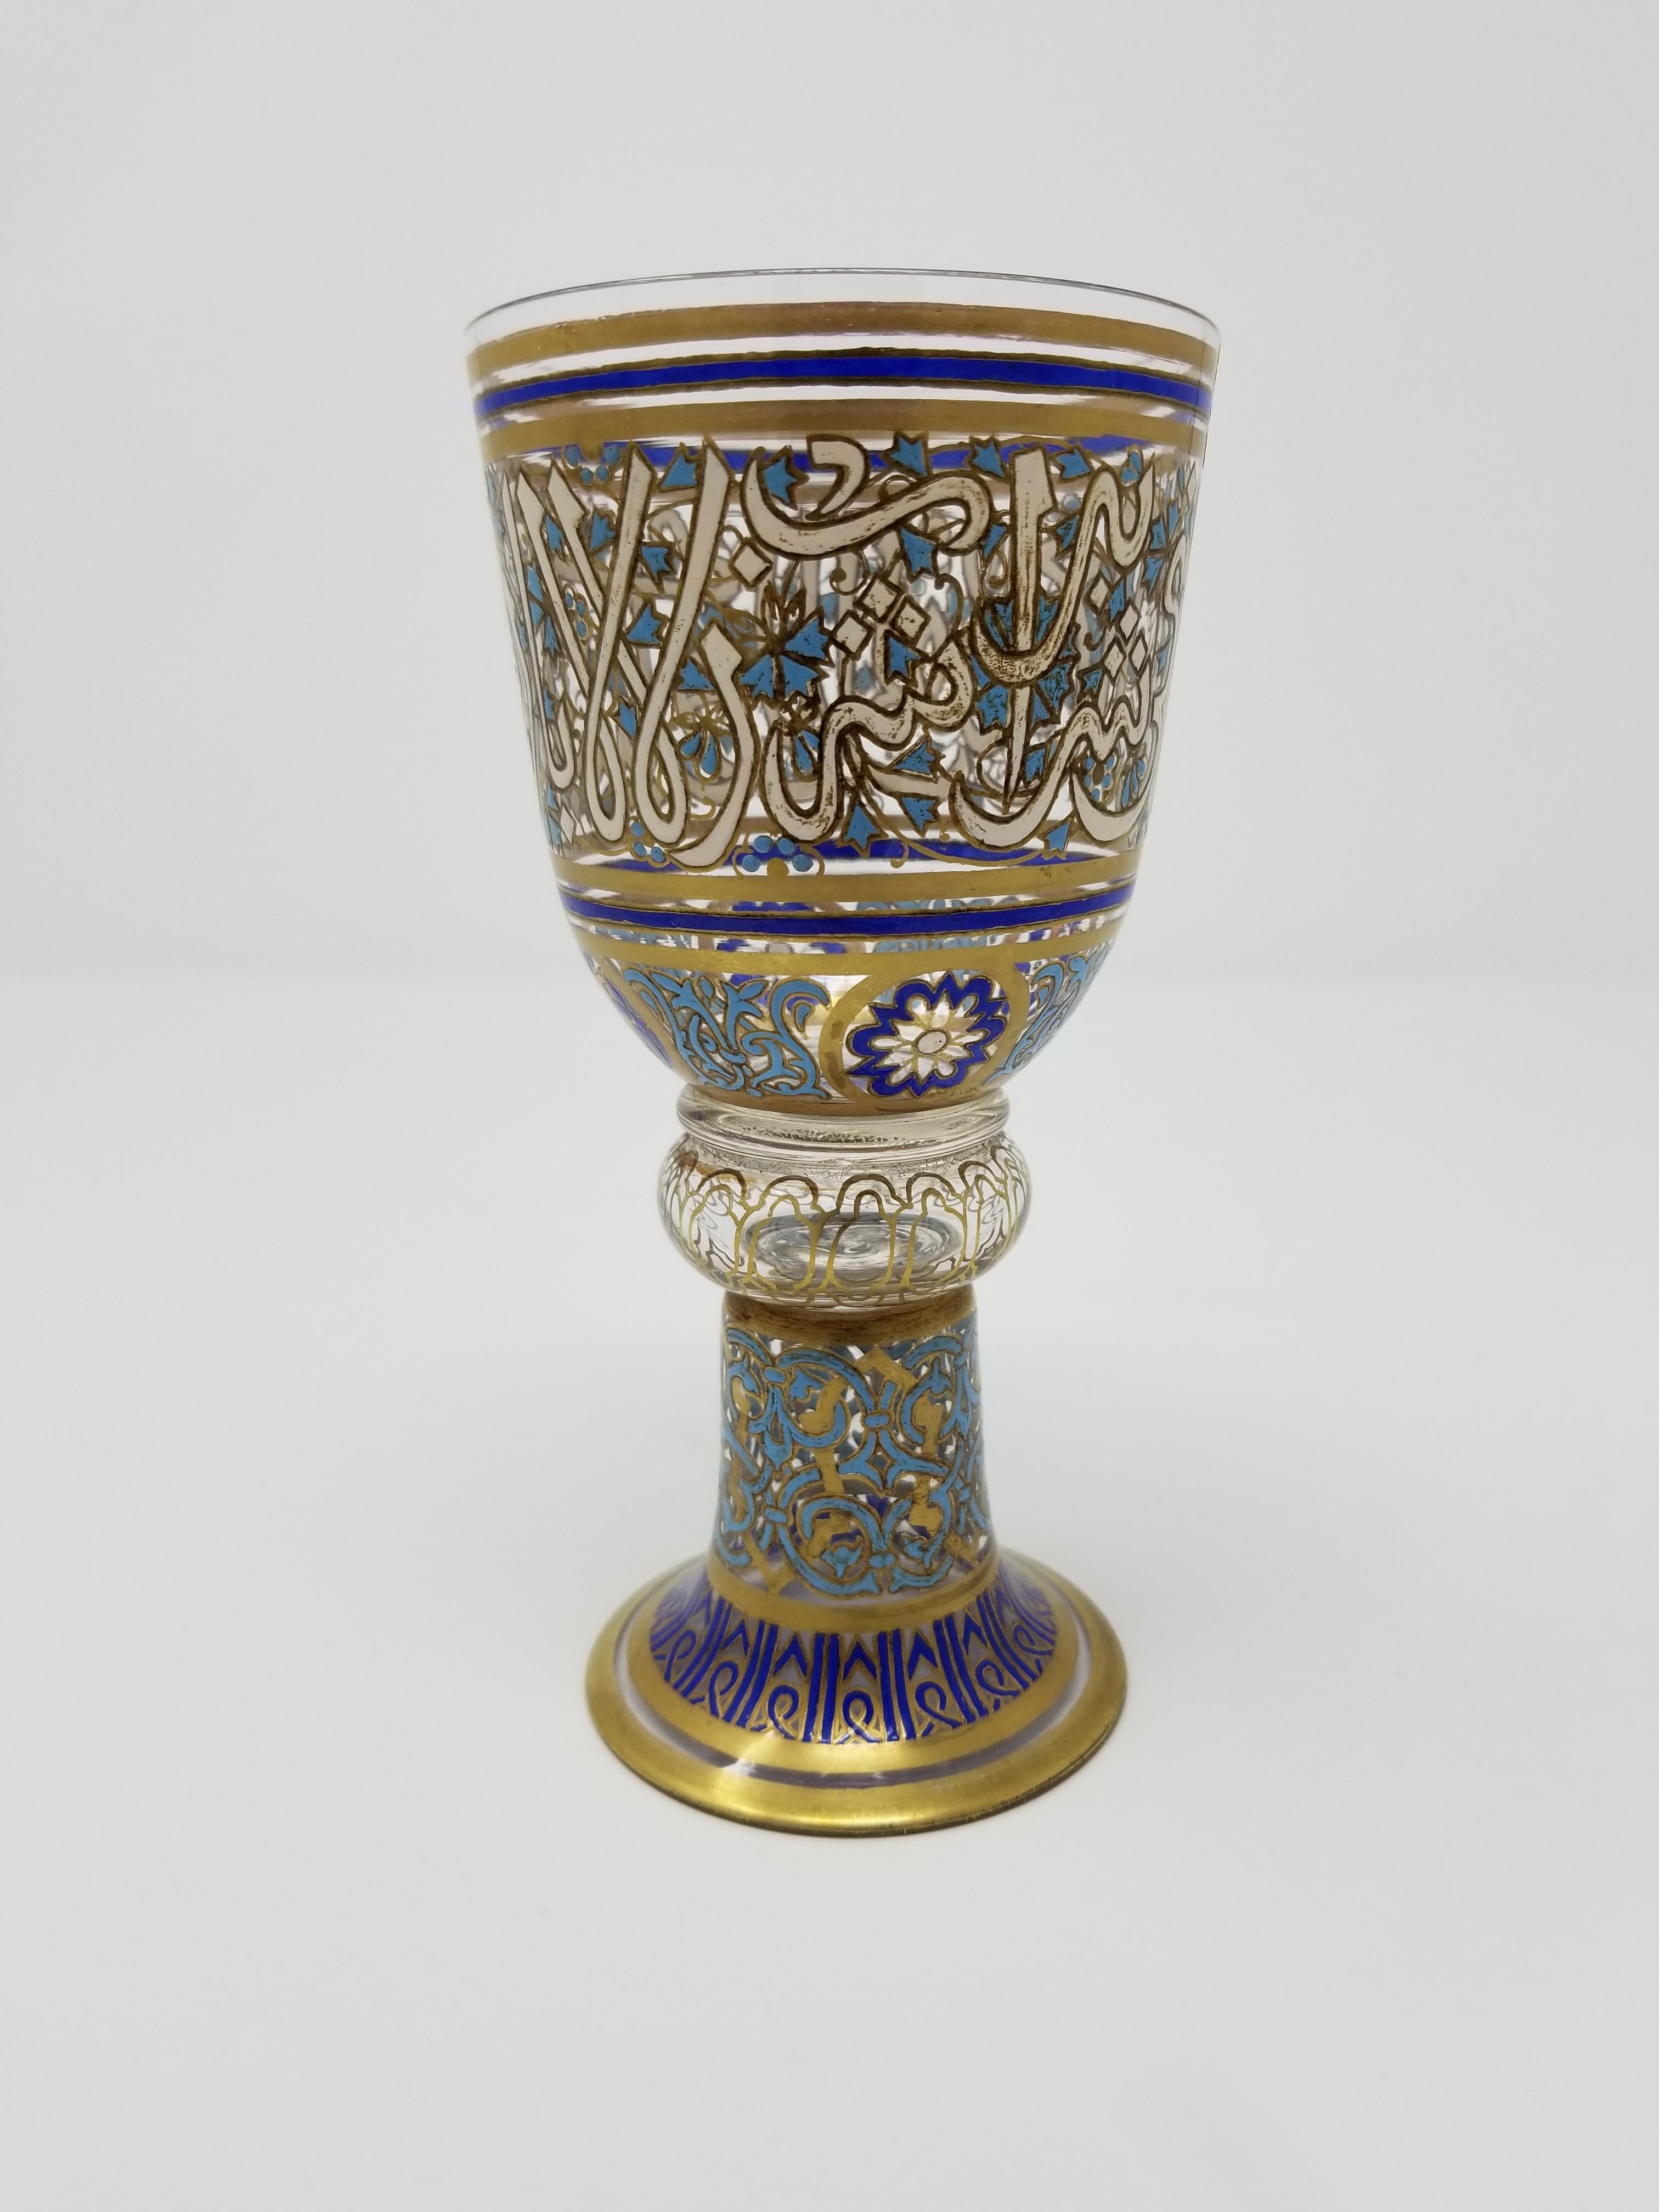 A magnificent antique Lobmeyr Islamic gilt and enameled glass goblet with Islamic calligraphy decoration, signed on the bottom by Lobmeyr. Most probably commissioned for the ottoman market. This goblet is magnificently enameled with cobalt blue,